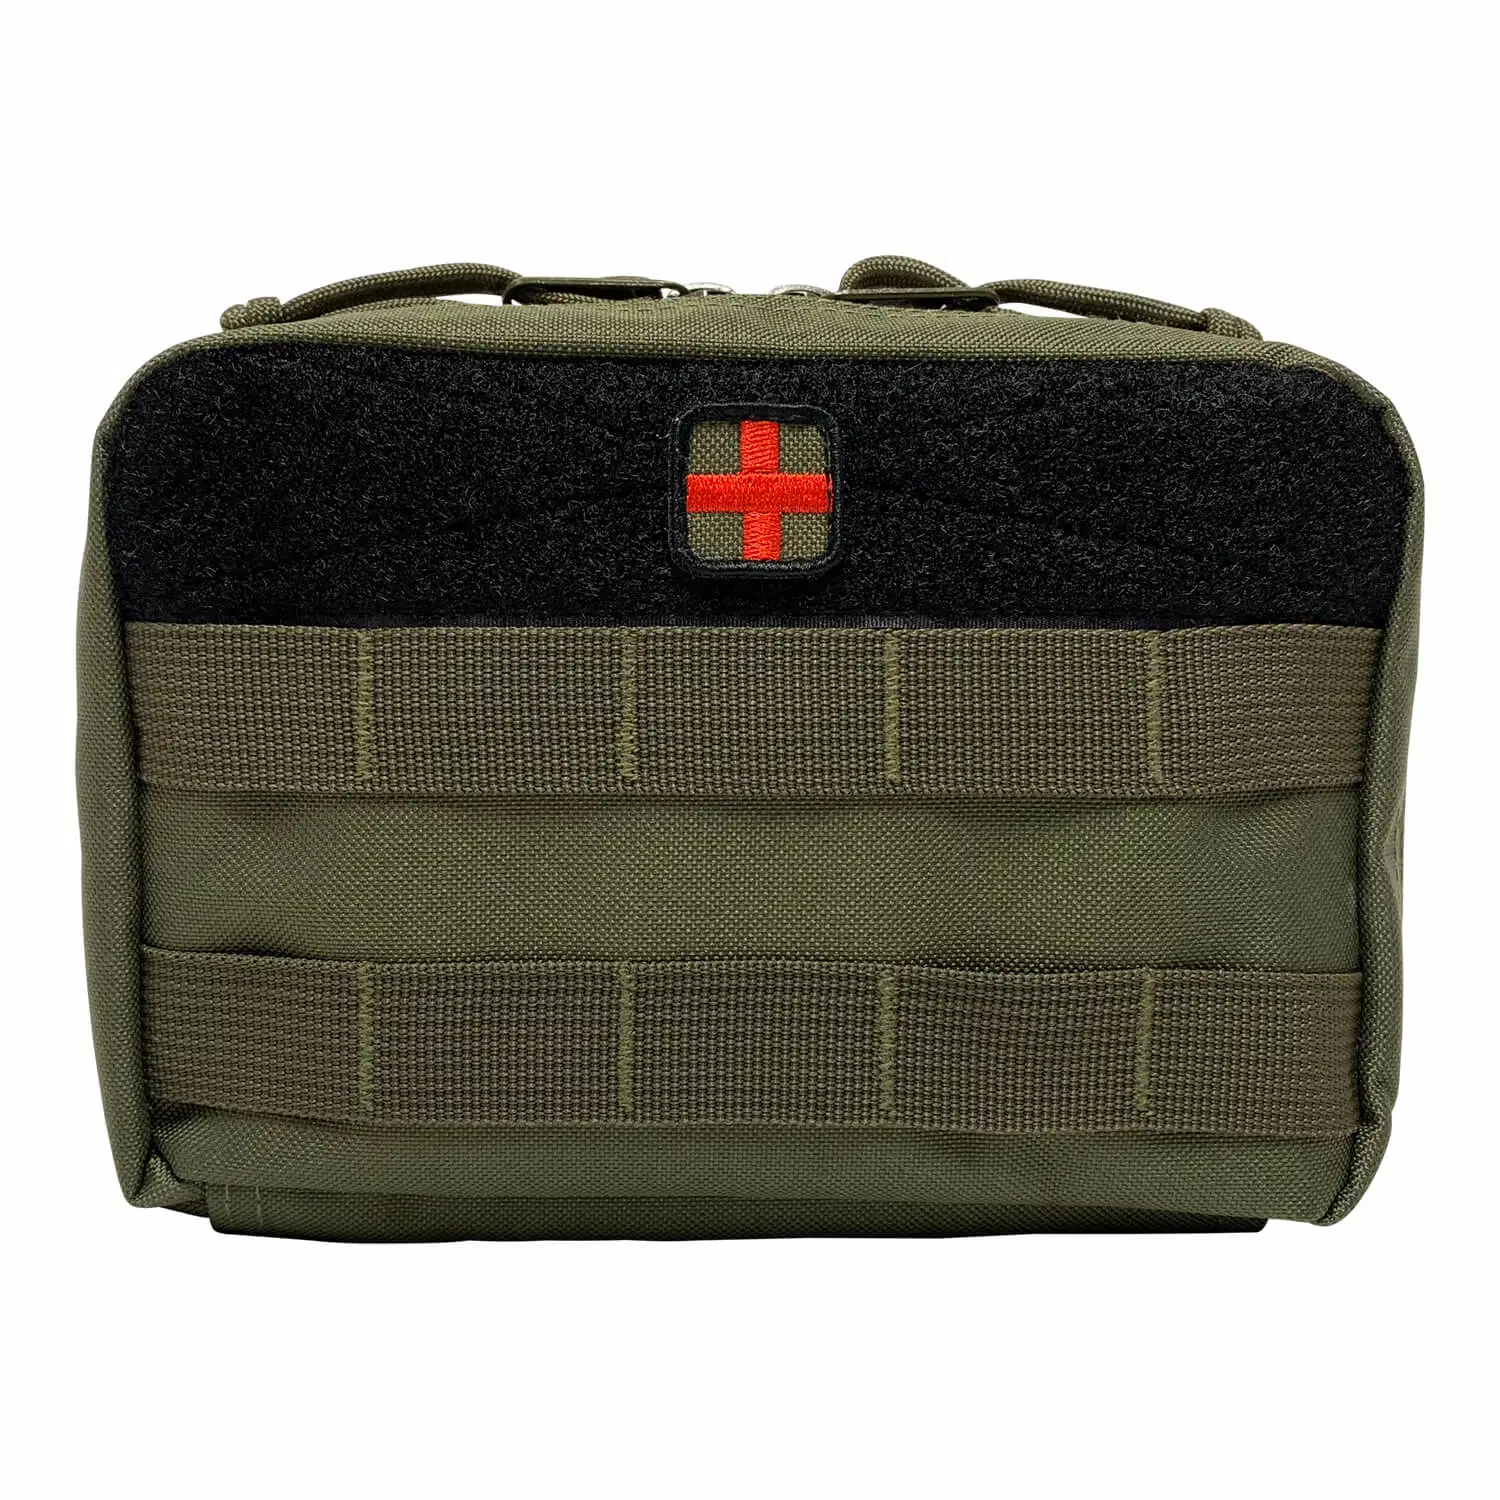 Medical Emergency Wholesale Portable Car Travel Camping Survival Emergency Supplies First Aid Kit Box Bag Case FDA